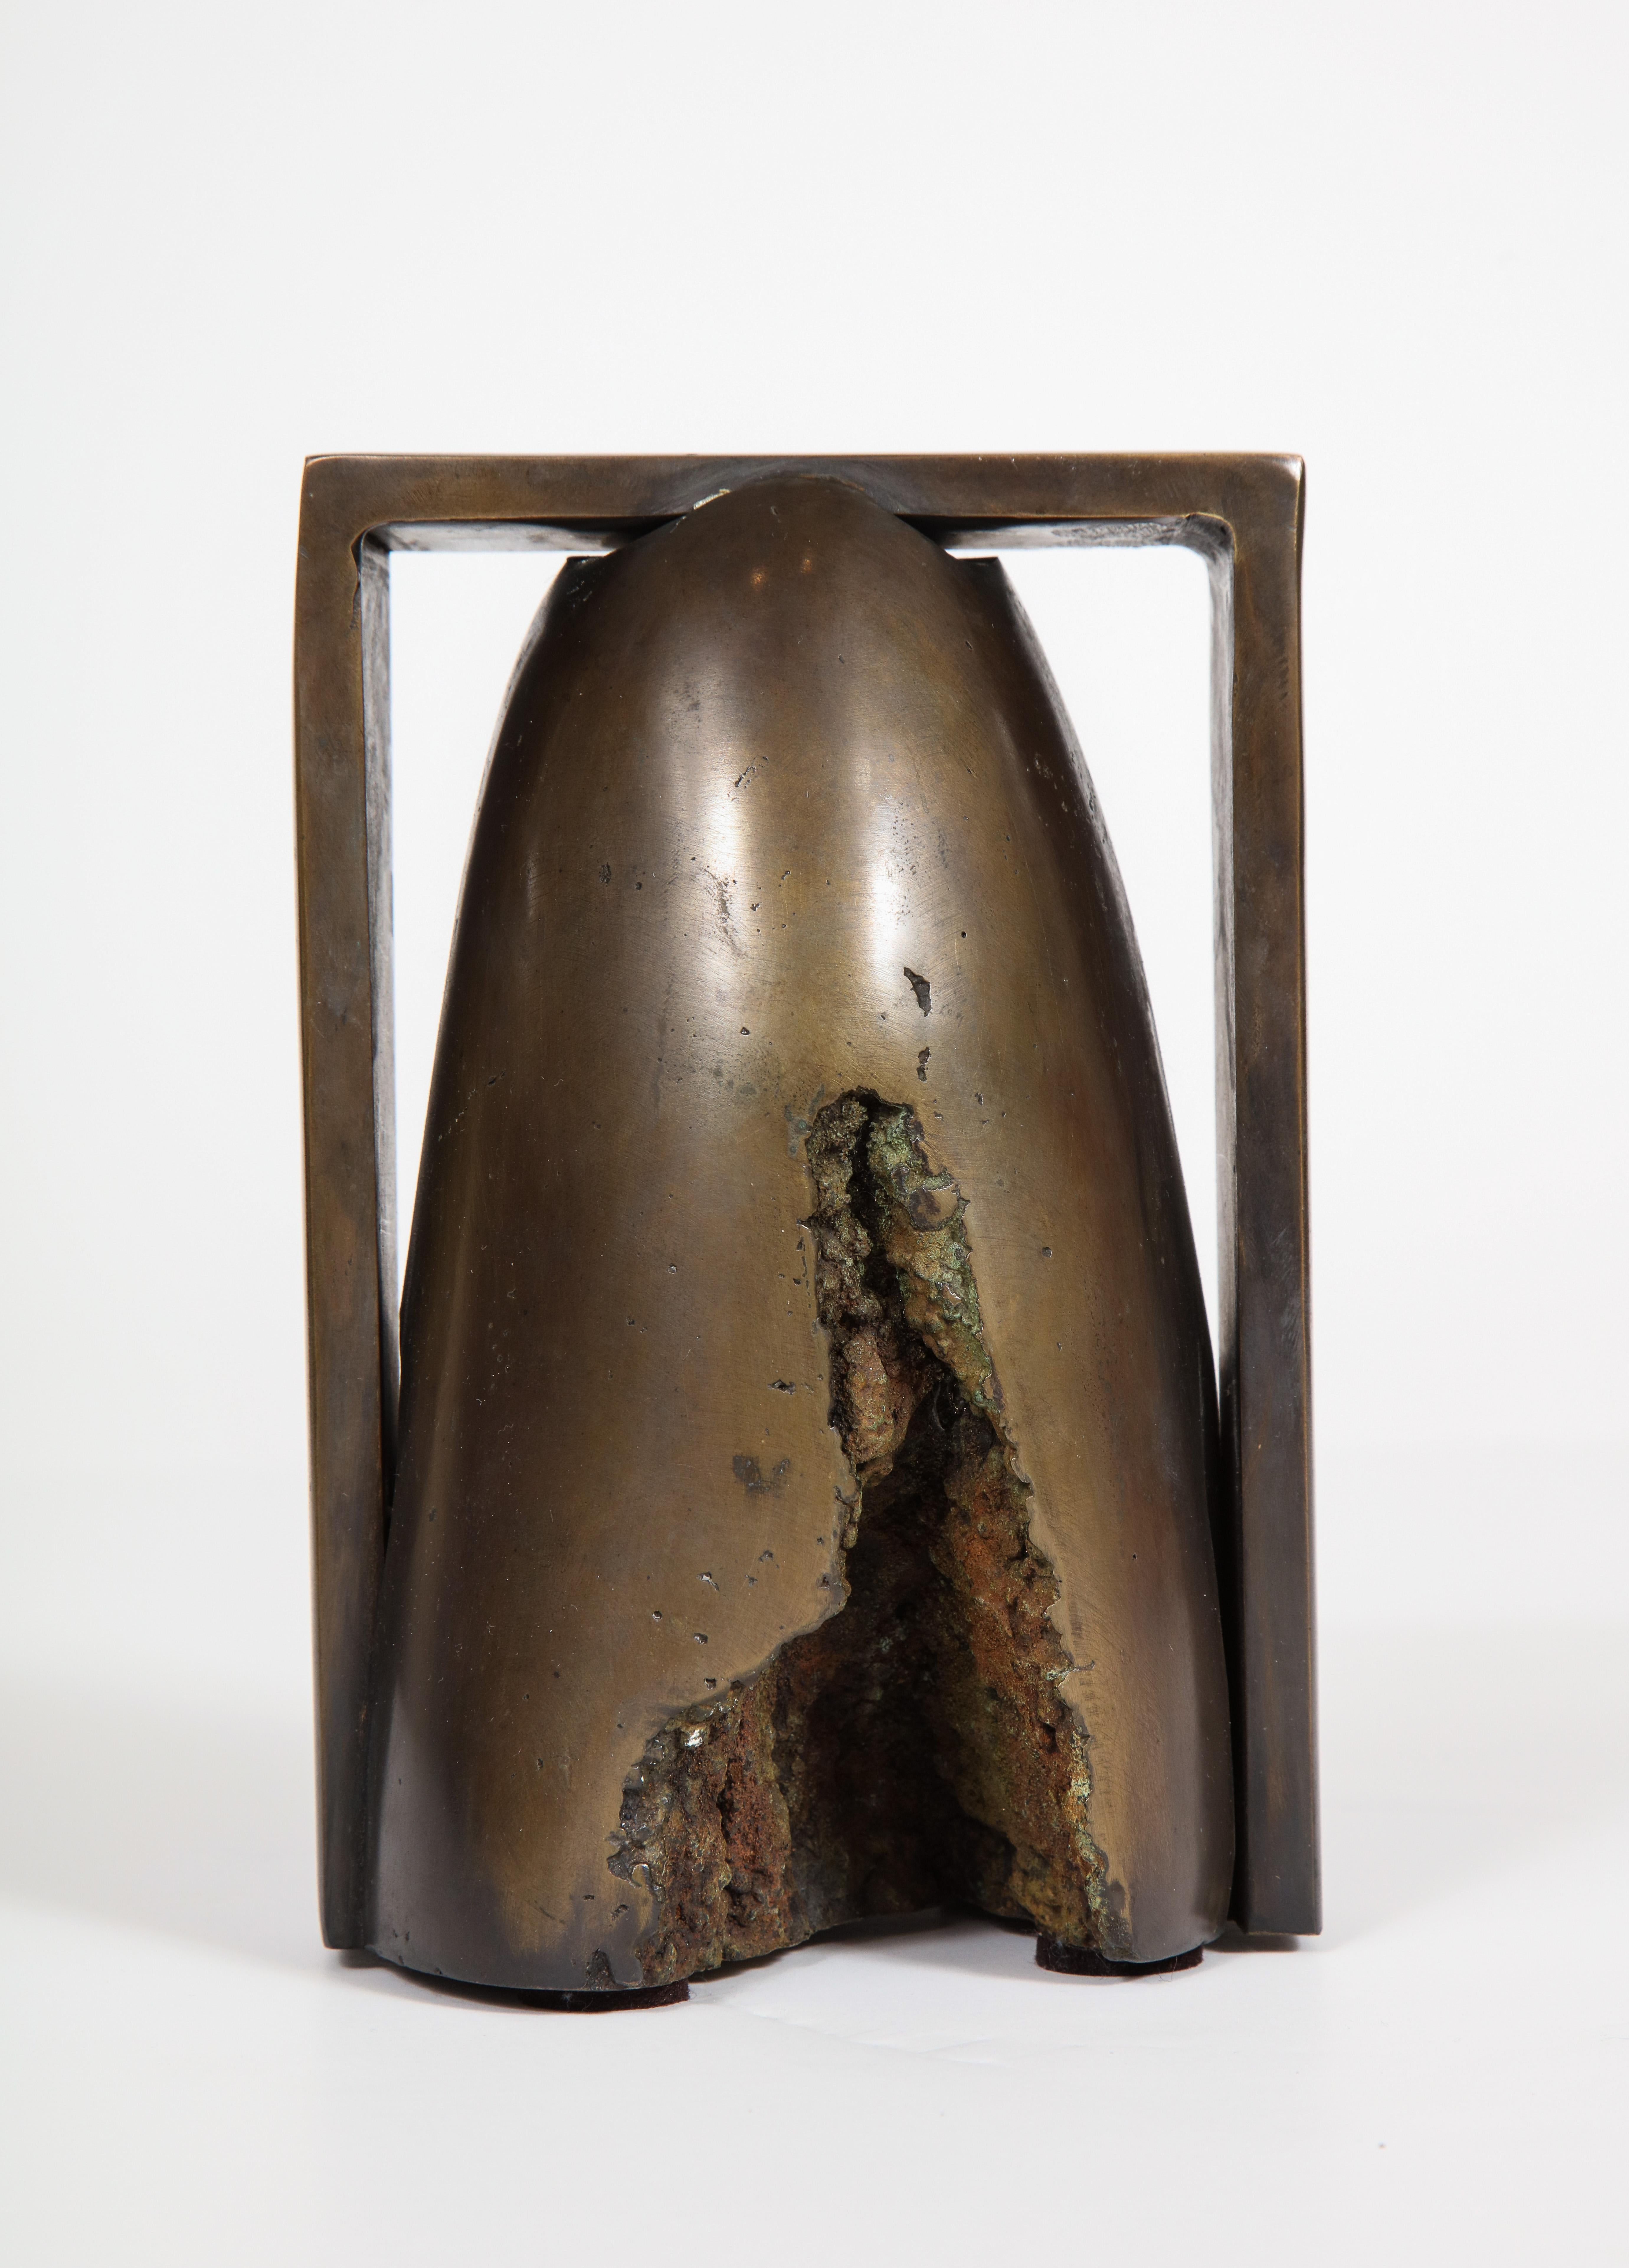 “Massah” (Small Dome), 1999 - Sculpture by Jay Wholley